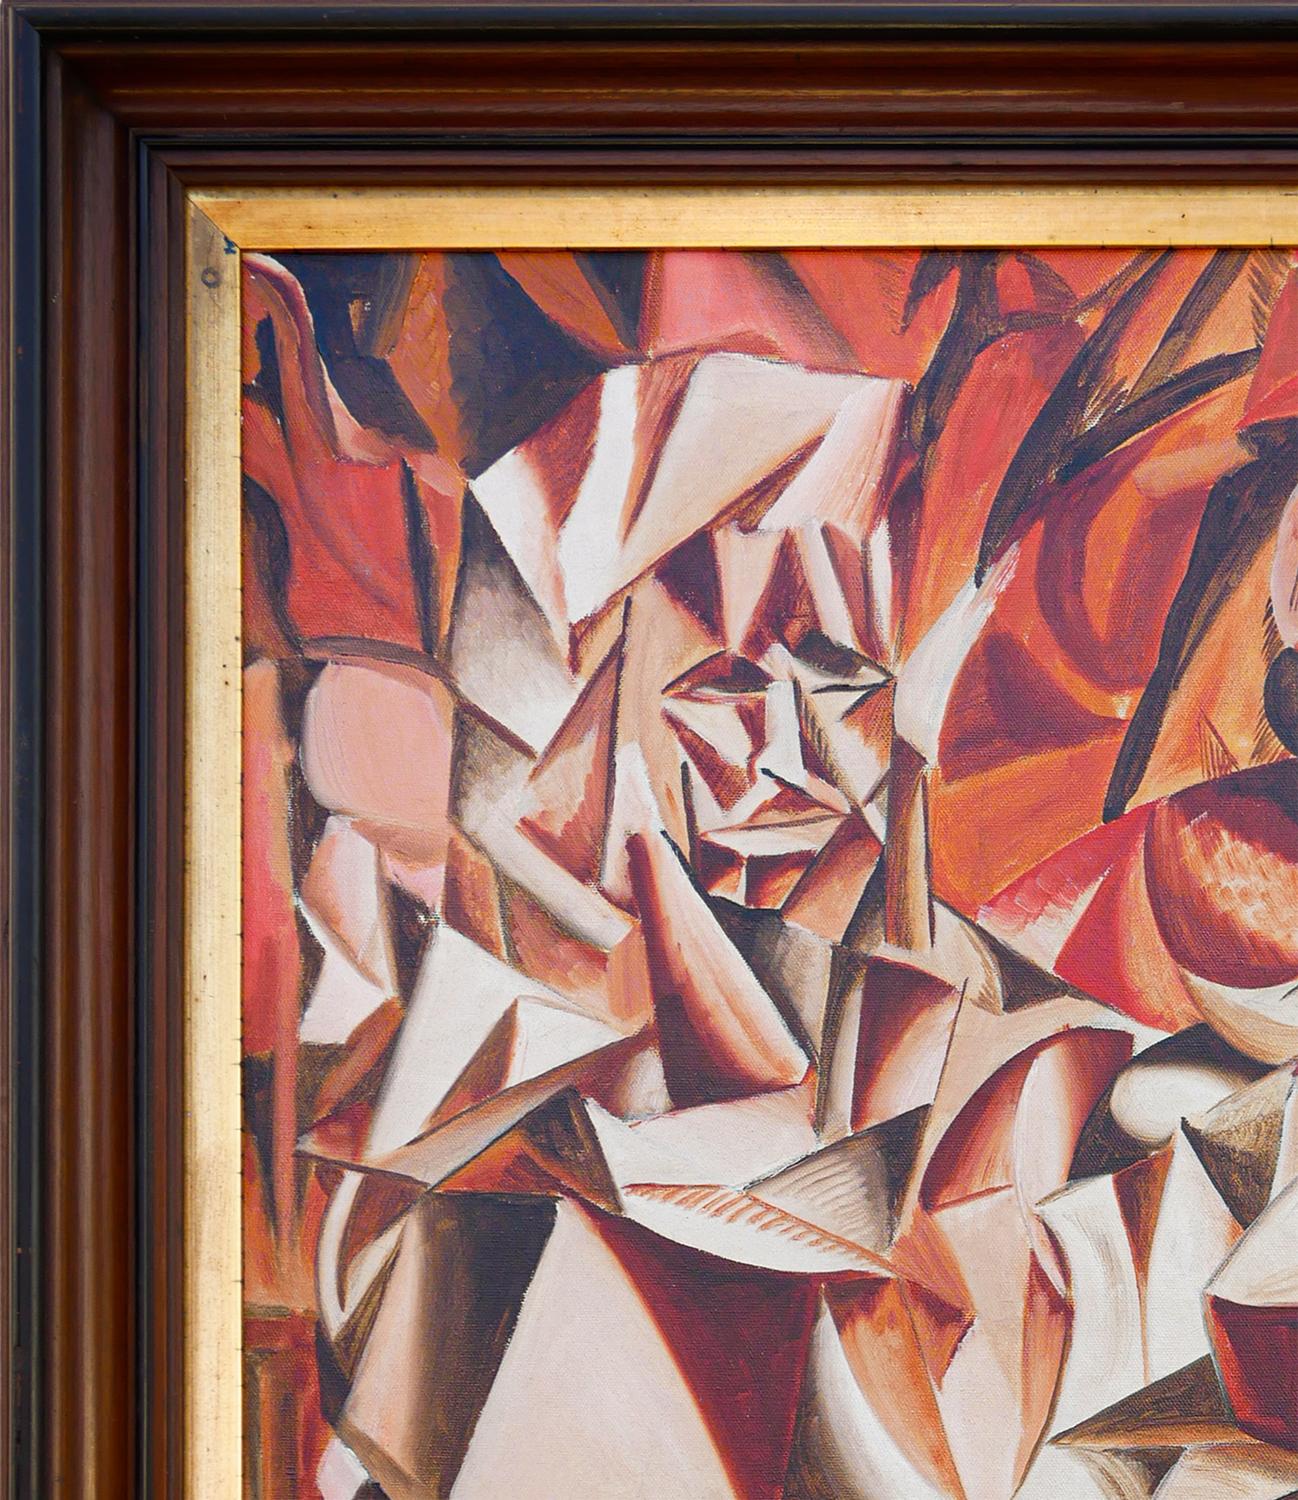 “Dienstag” Orange, Red, and Brown Abstract Cubist Figurative Painting 1